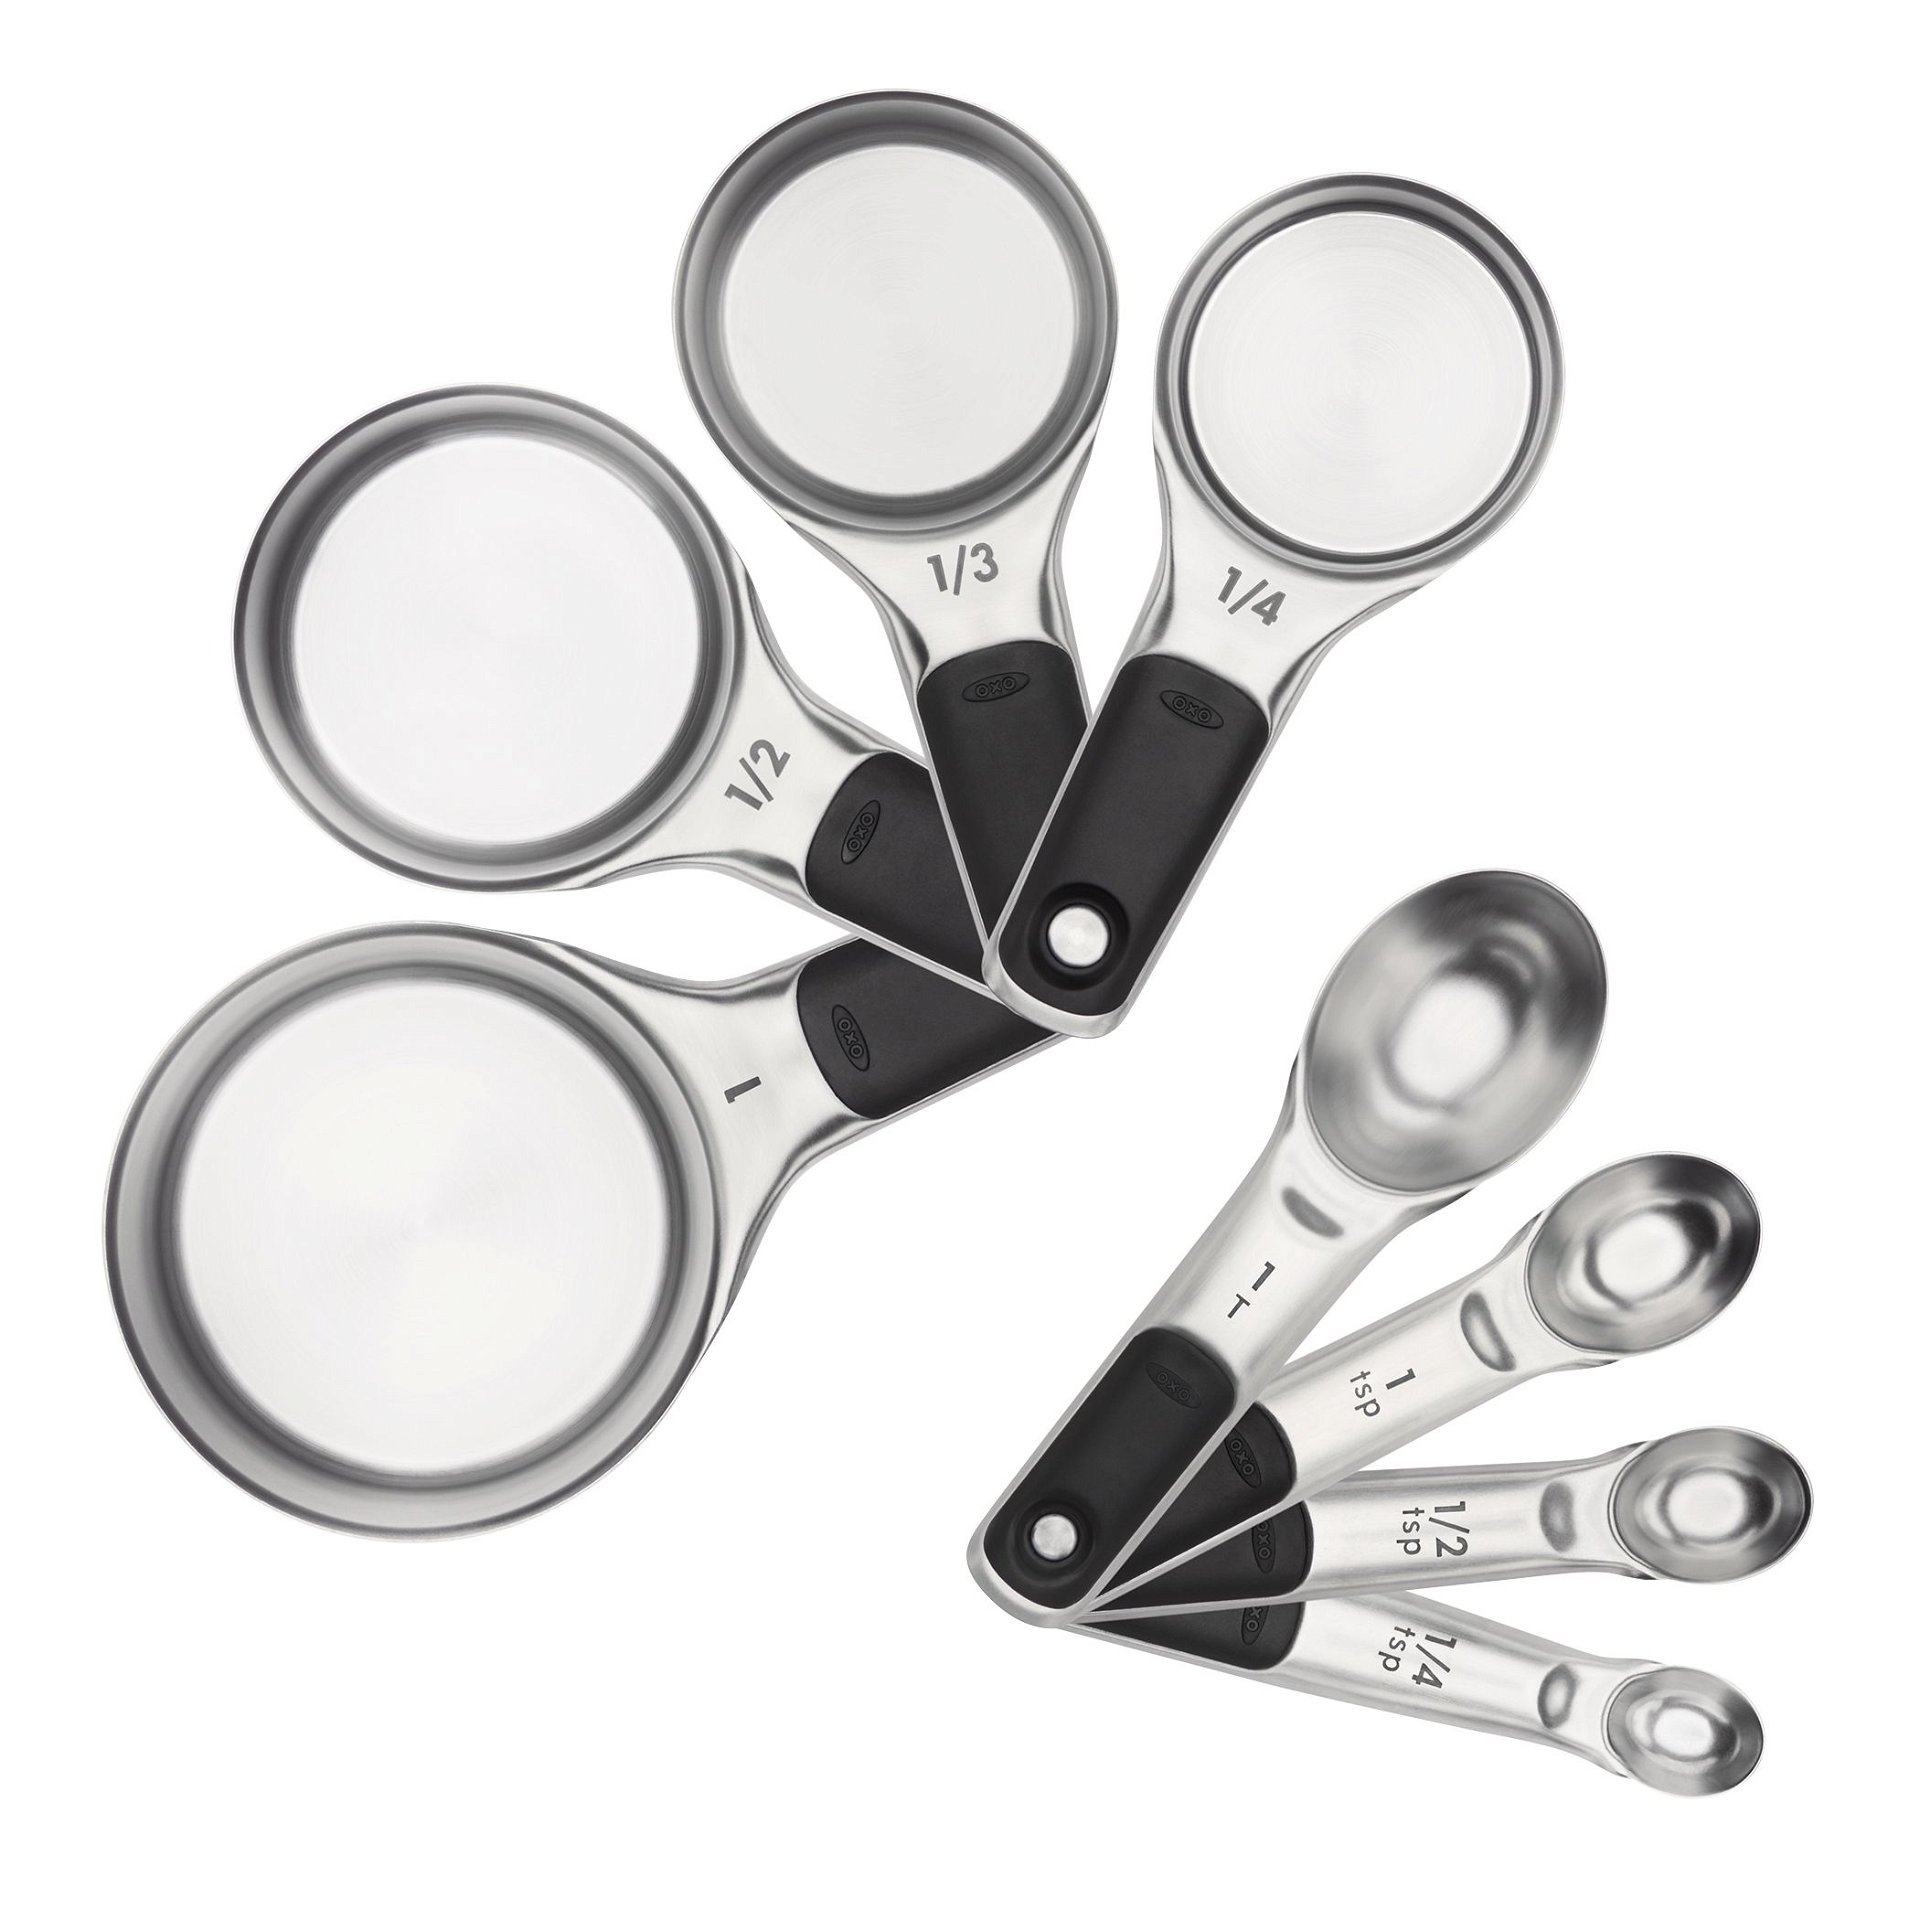 Cuisinart 4pc Stainless Steel Magnetic Measuring Cup Set Black/Silver